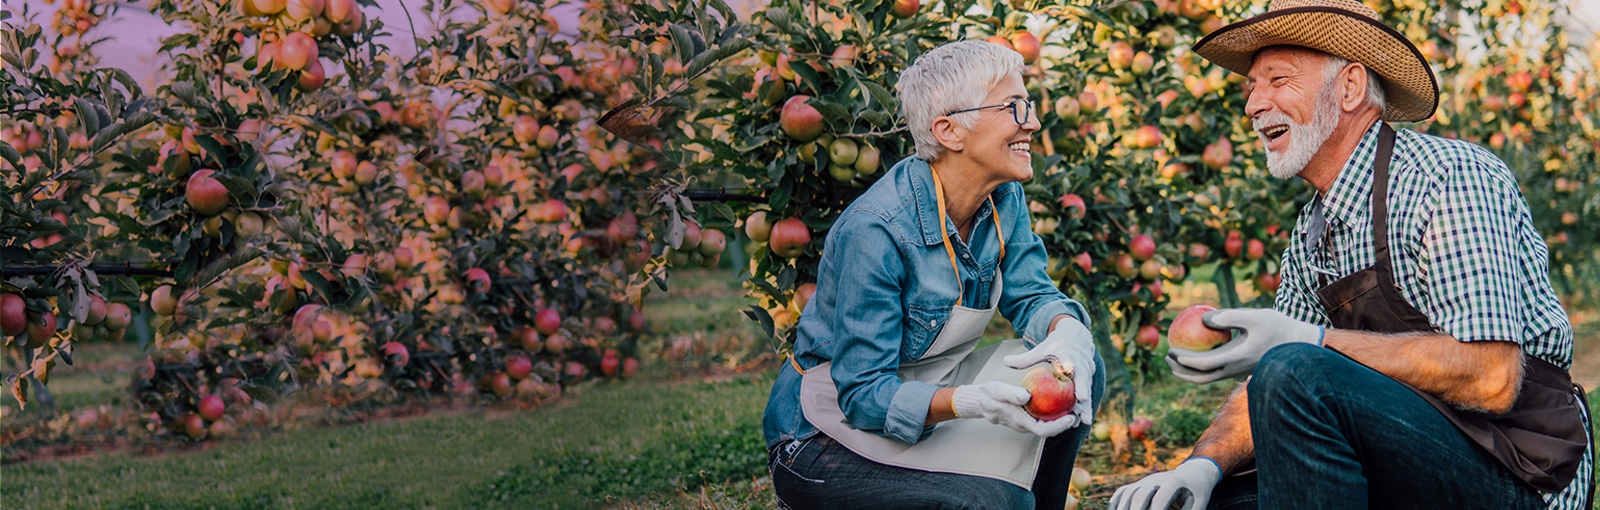 elderly couple picking apples in orchard